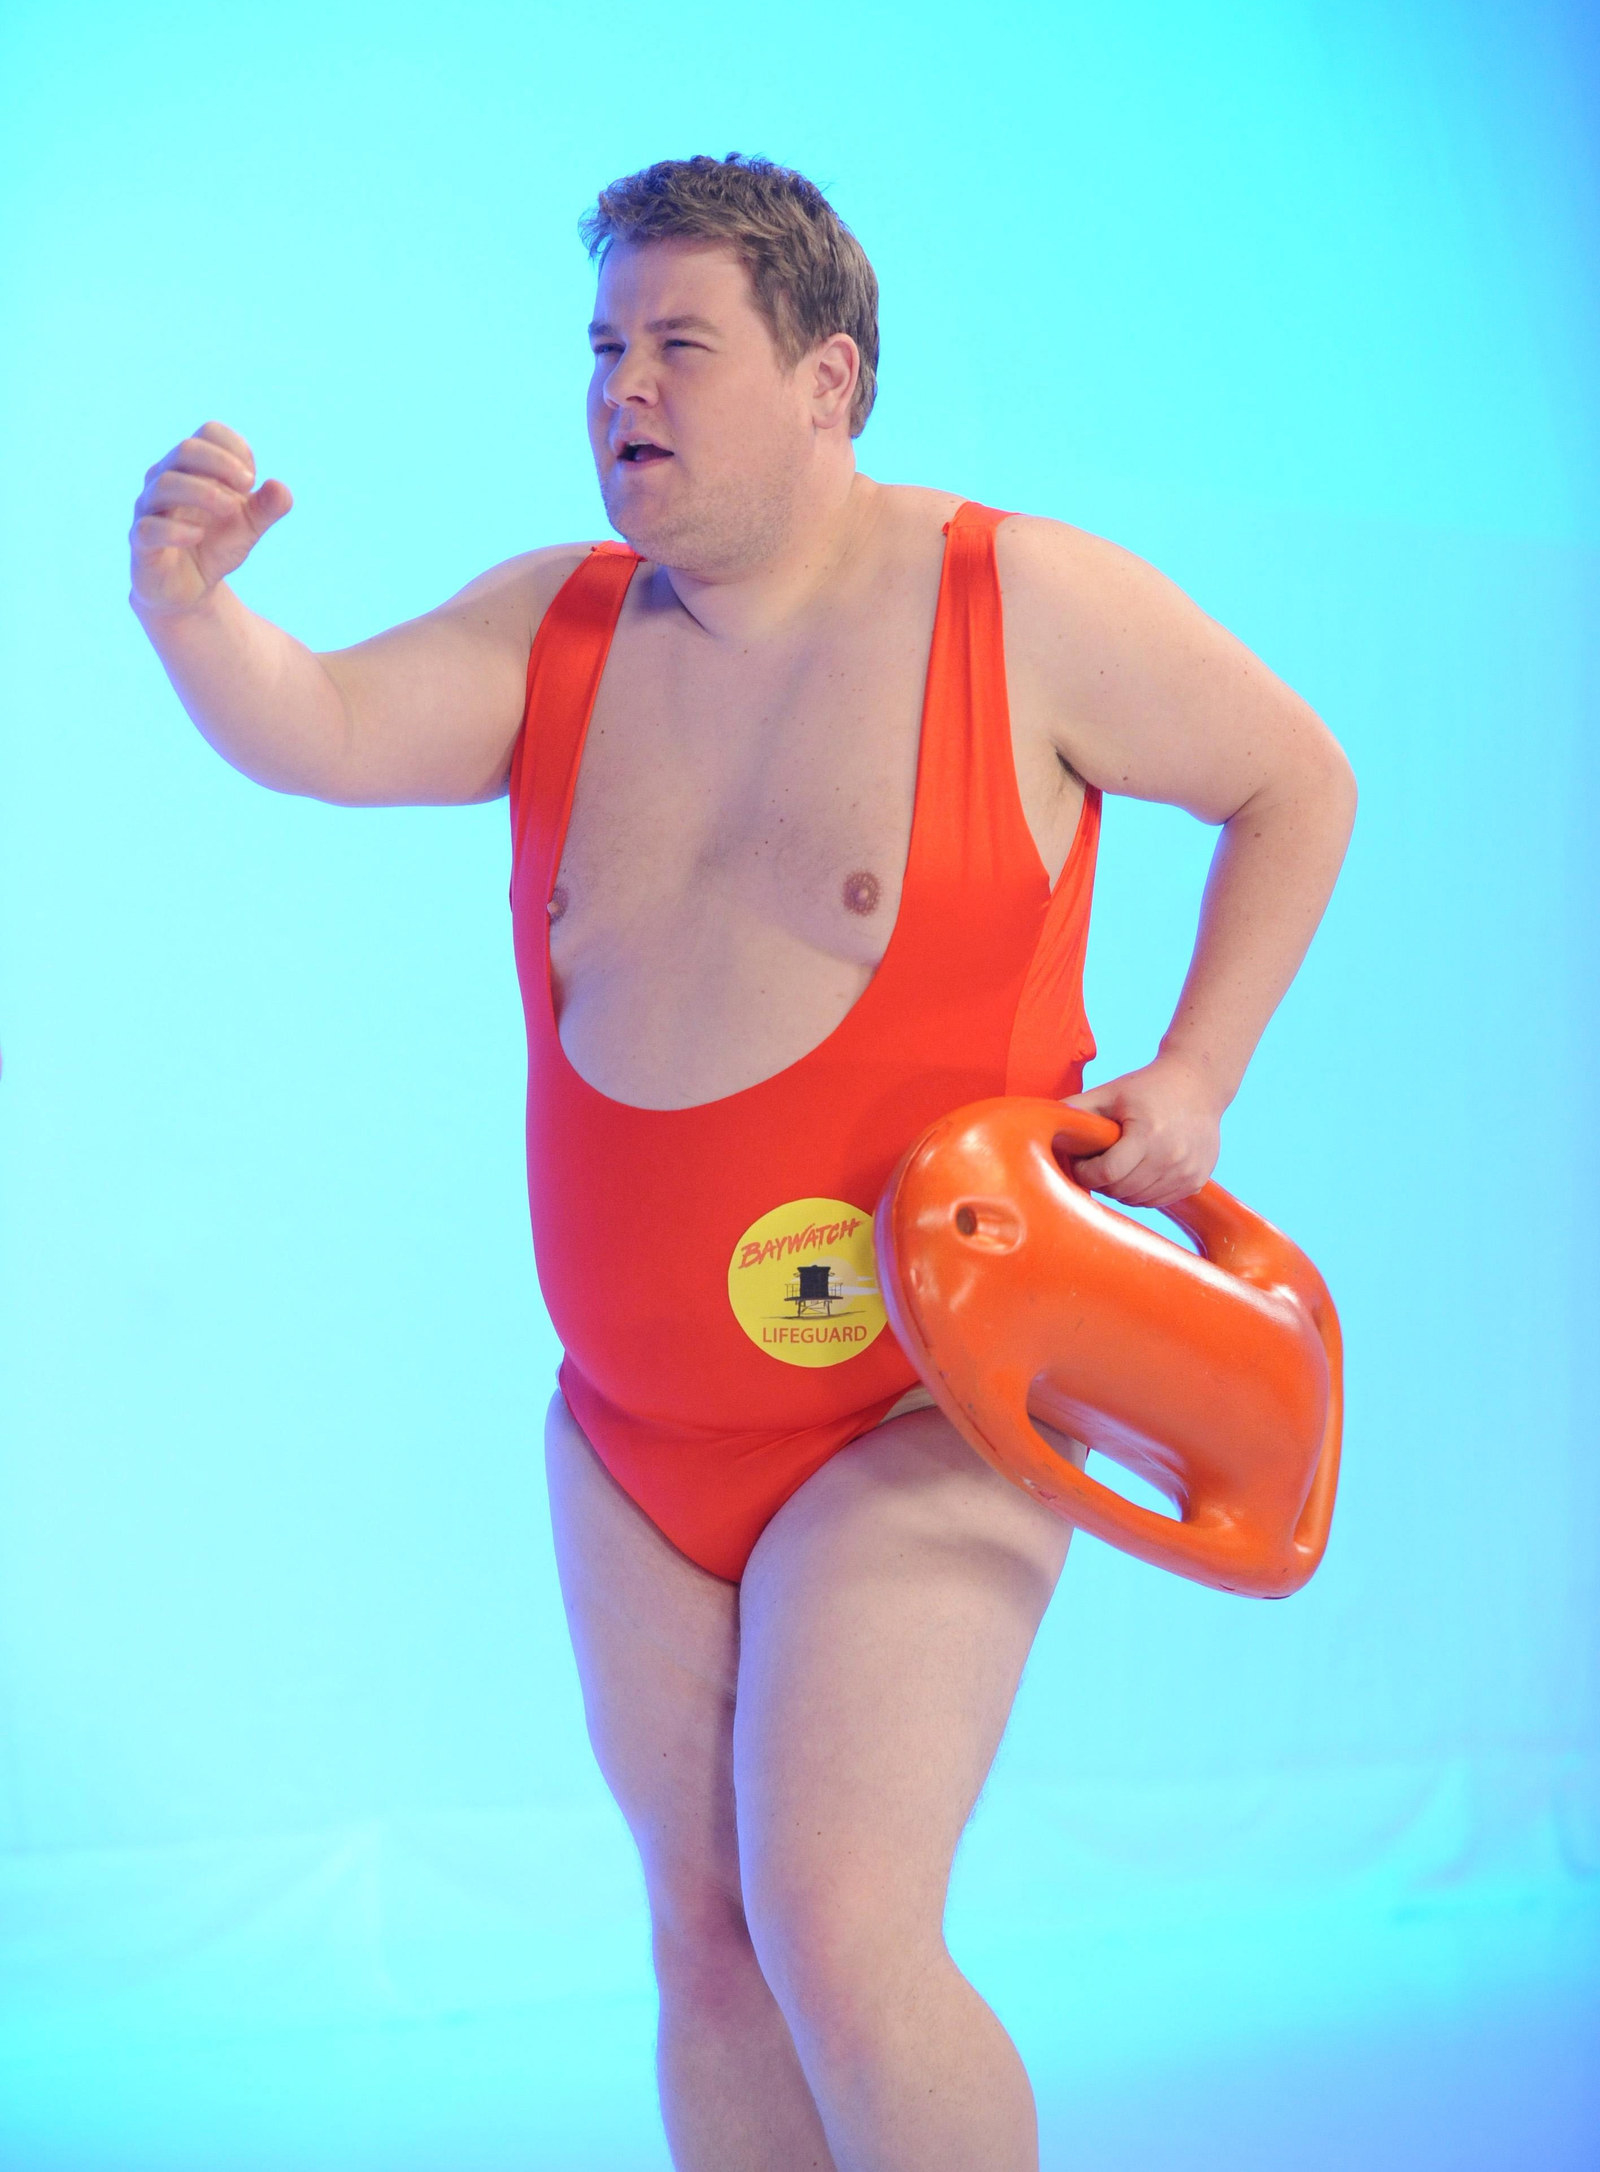 James Corden doing a photoshoot in a bathing suit. 